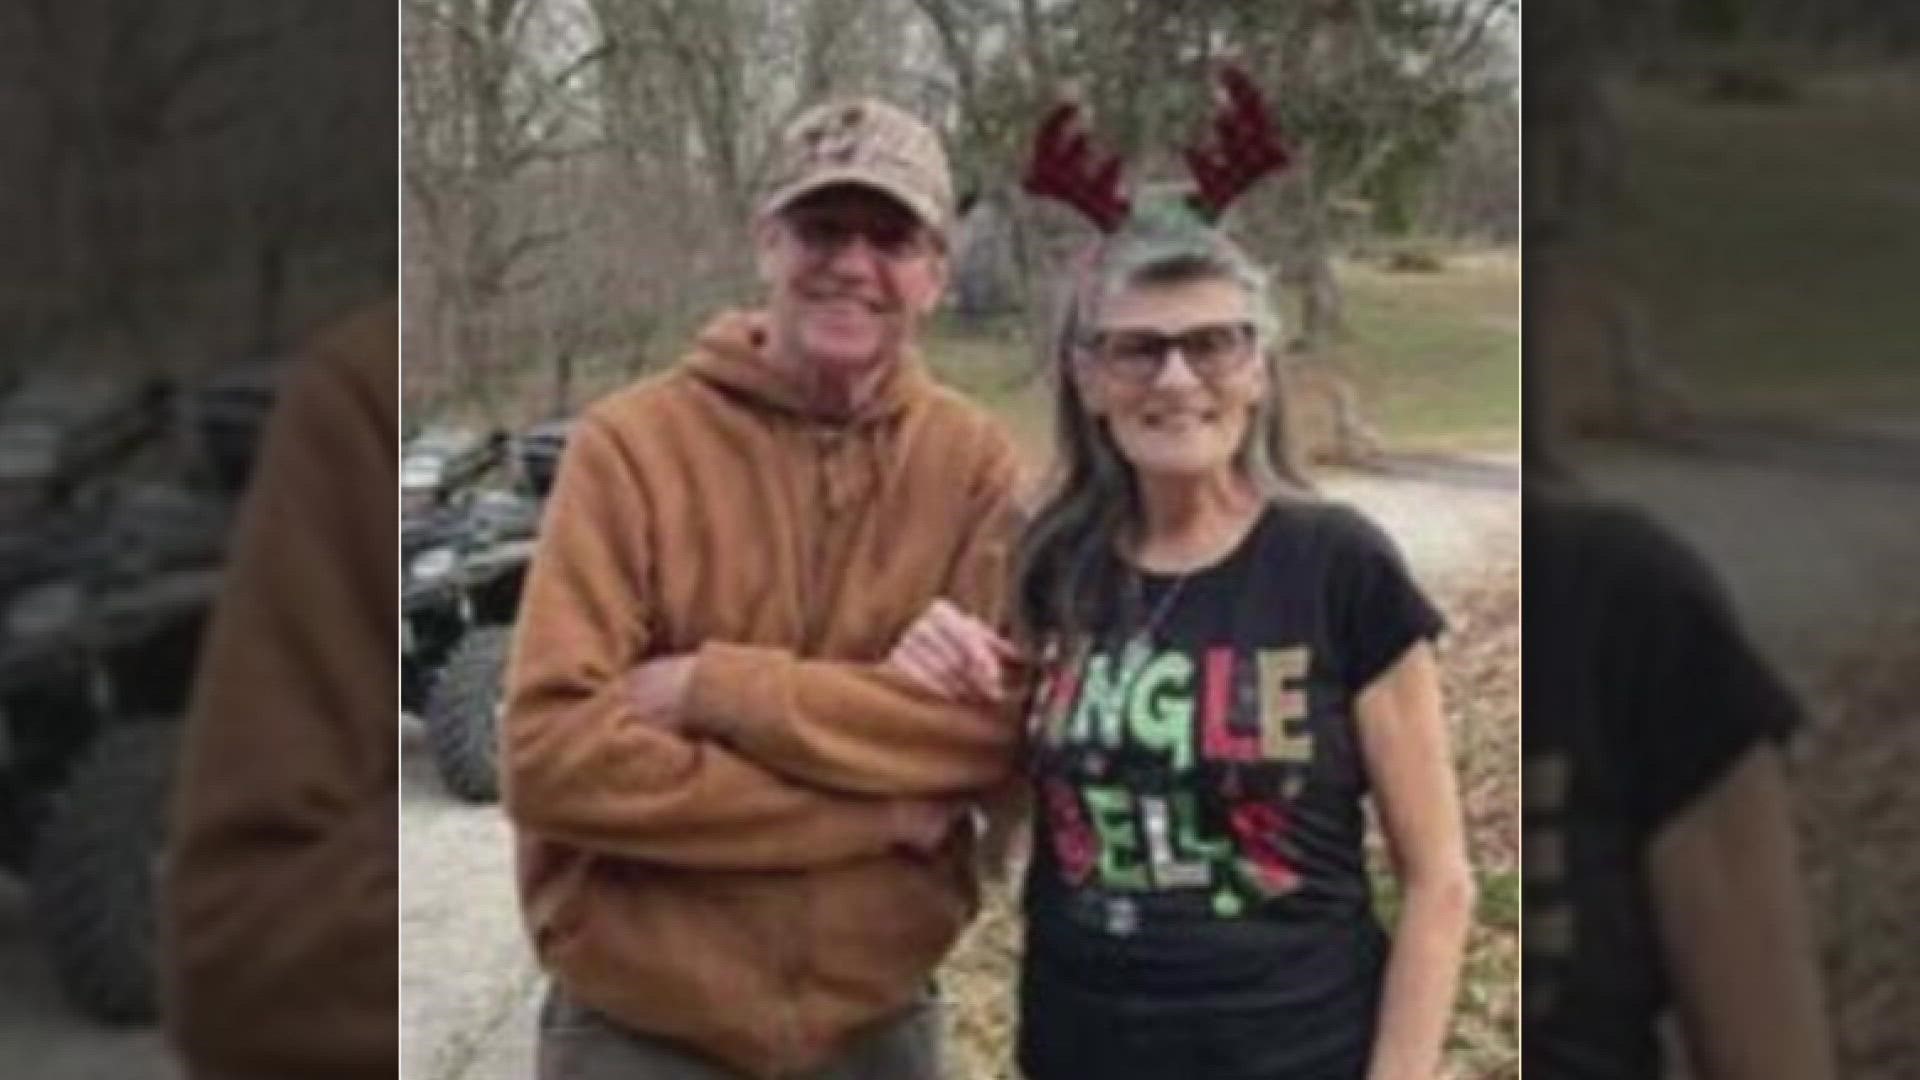 The Alamosa County Sheriff's Office is asking people to be on the lookout for a couple, Robert and Mary Jane Bowman, who've been missing for nearly a week.